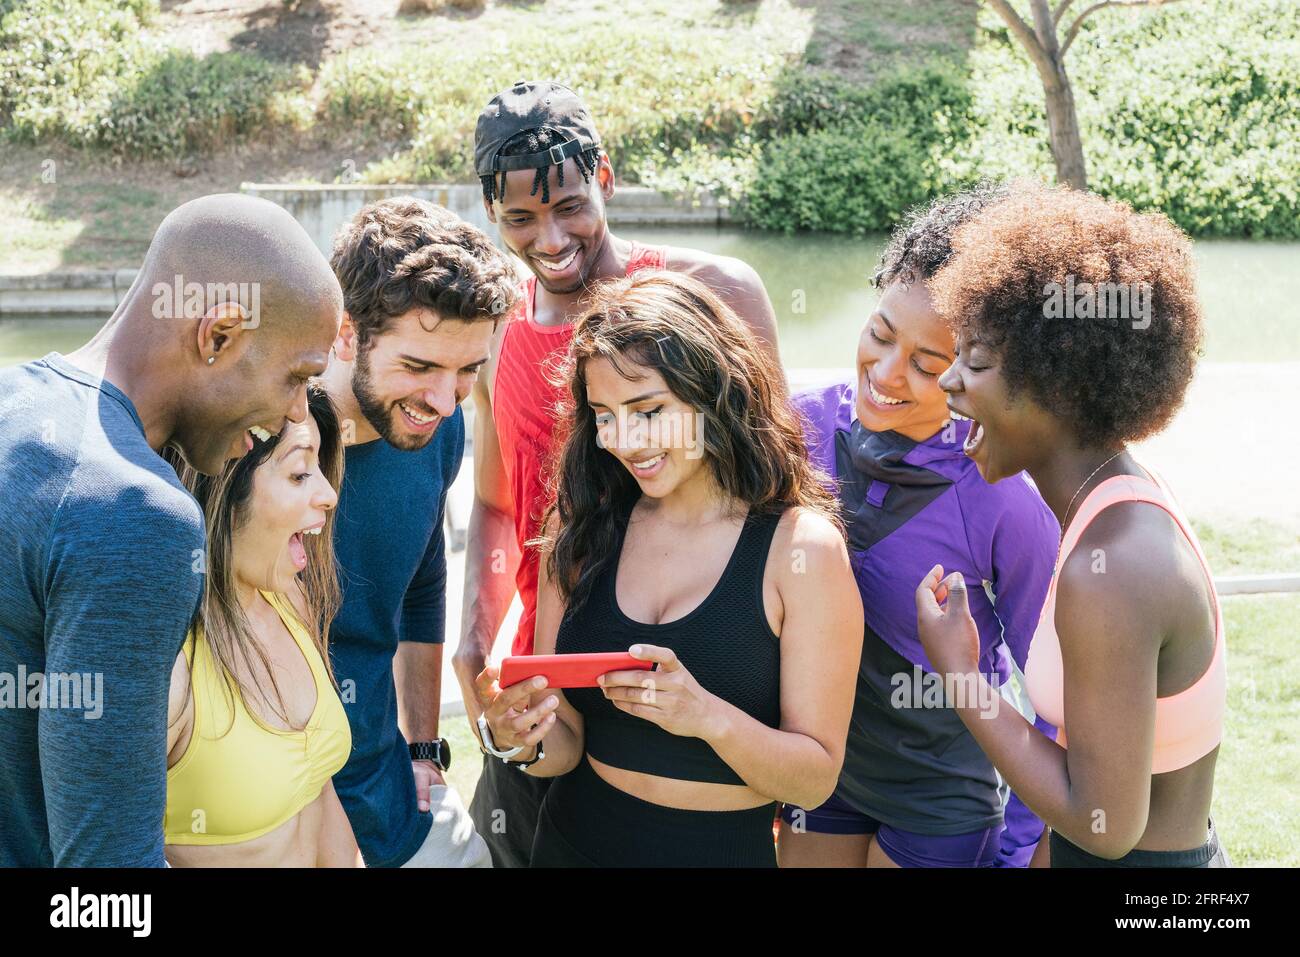 Group of runners looking at something very funny on a mobile. Stock Photo